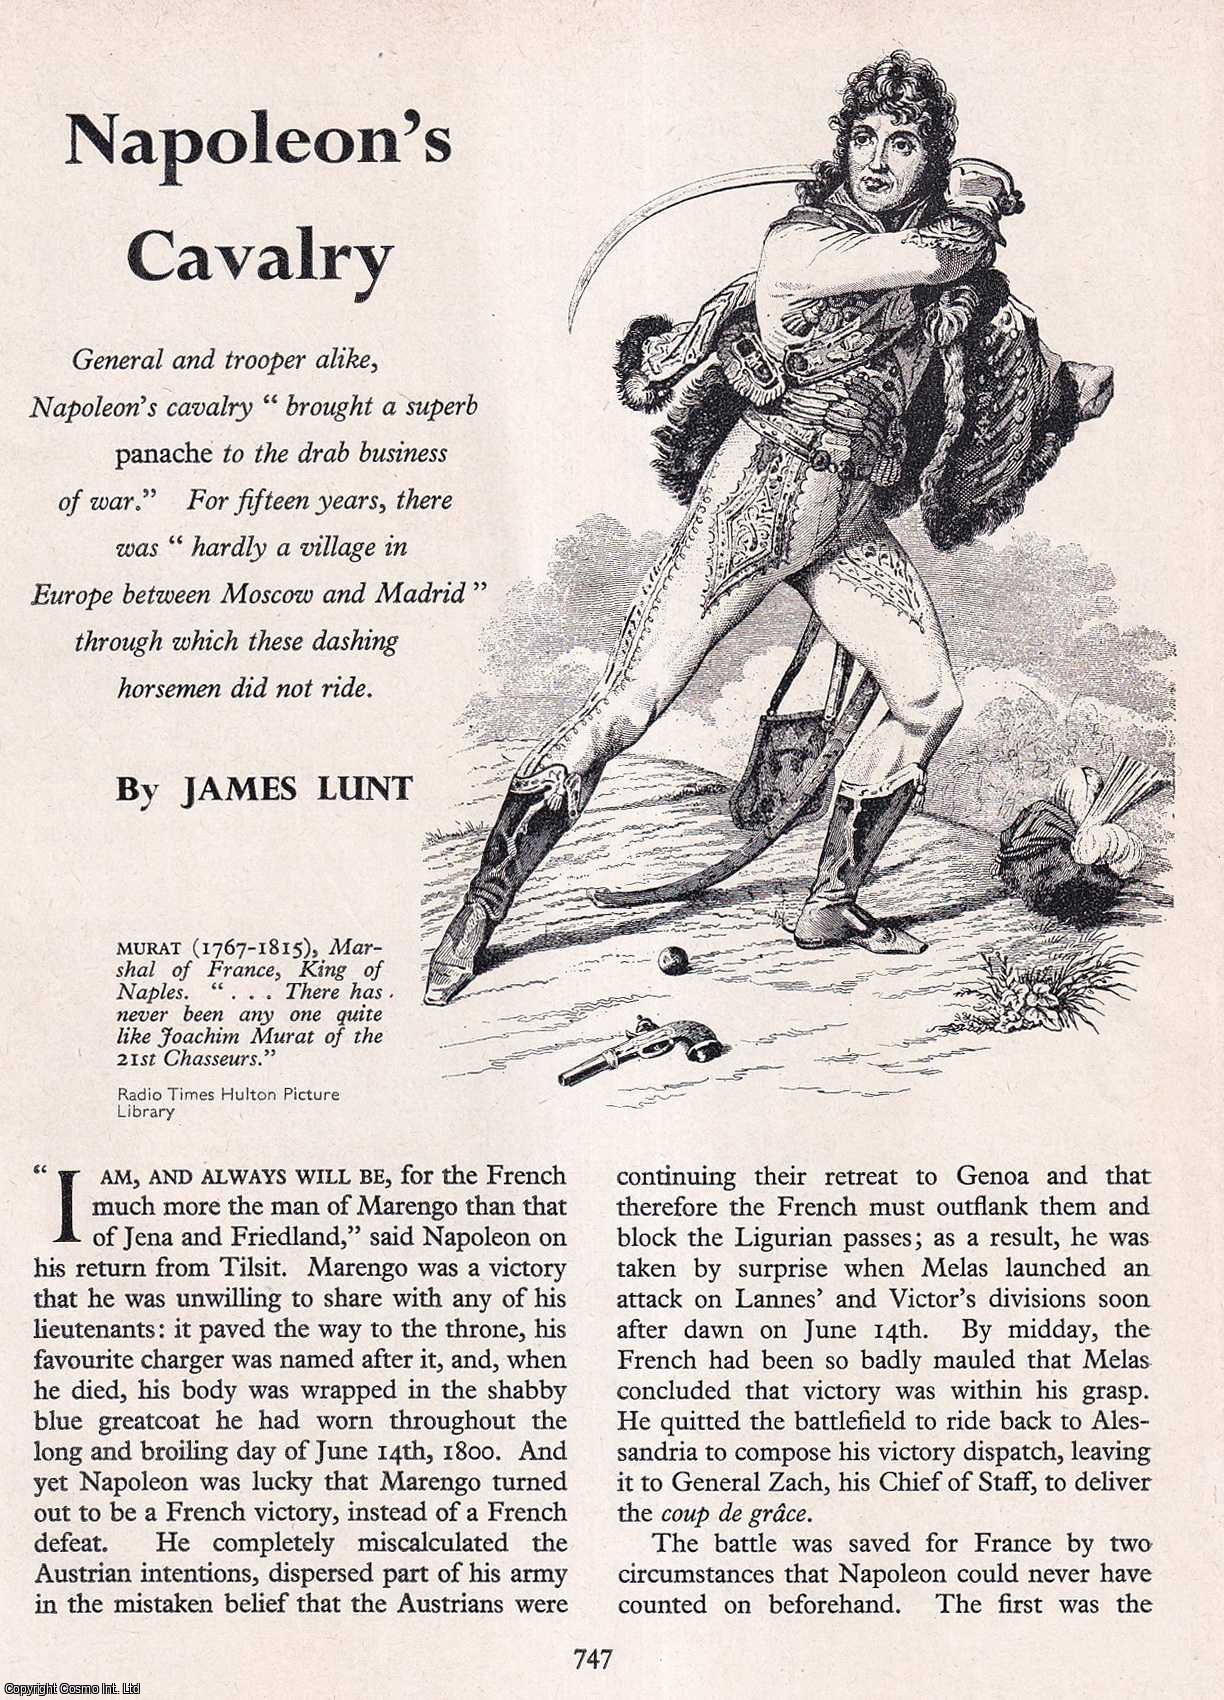 James Lunt - Napoleon's Cavalry. An original article from History Today magazine, 1960.